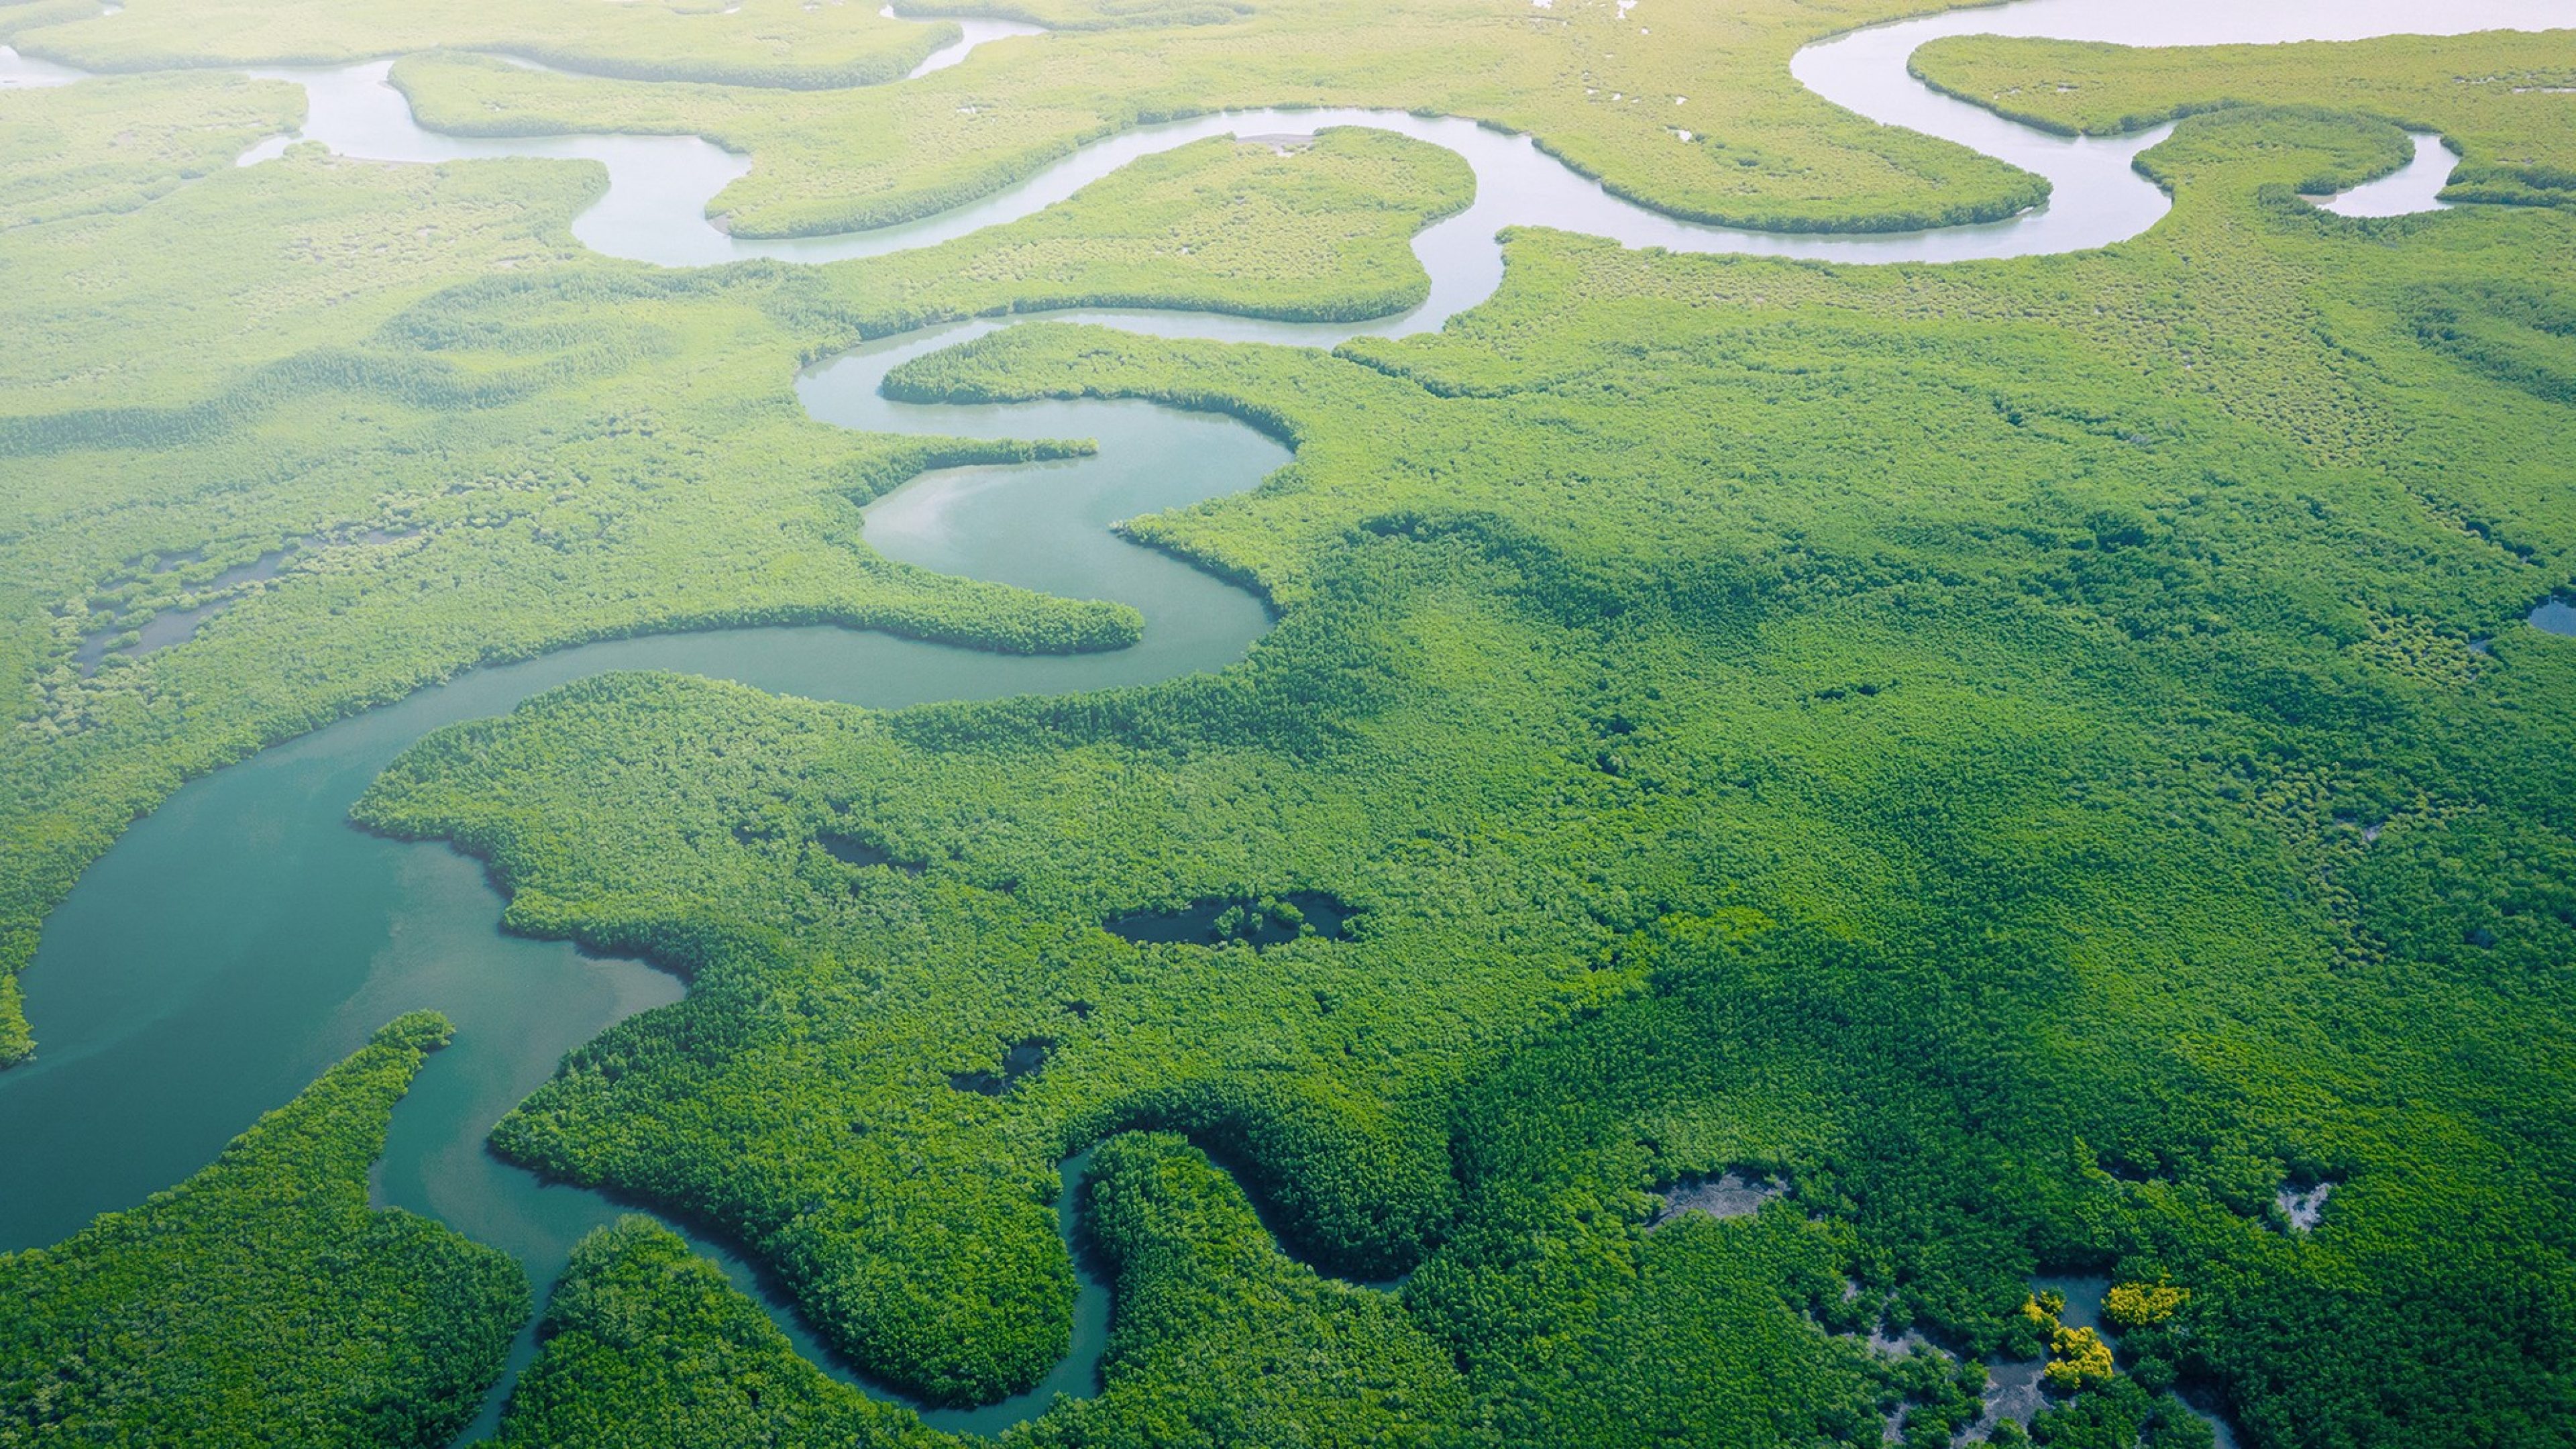 Gambia Mangroves. Aerial view of mangrove forest in Gambia. Photo made by drone from above. Africa Natural Landscape.; Shutterstock ID 1571135380; purchase_order: Swiss Life Asset Managers France; job: Swiss Life Asset Managers France; client: Swiss Life Asset Managers France; other: Swiss Life Asset Managers France